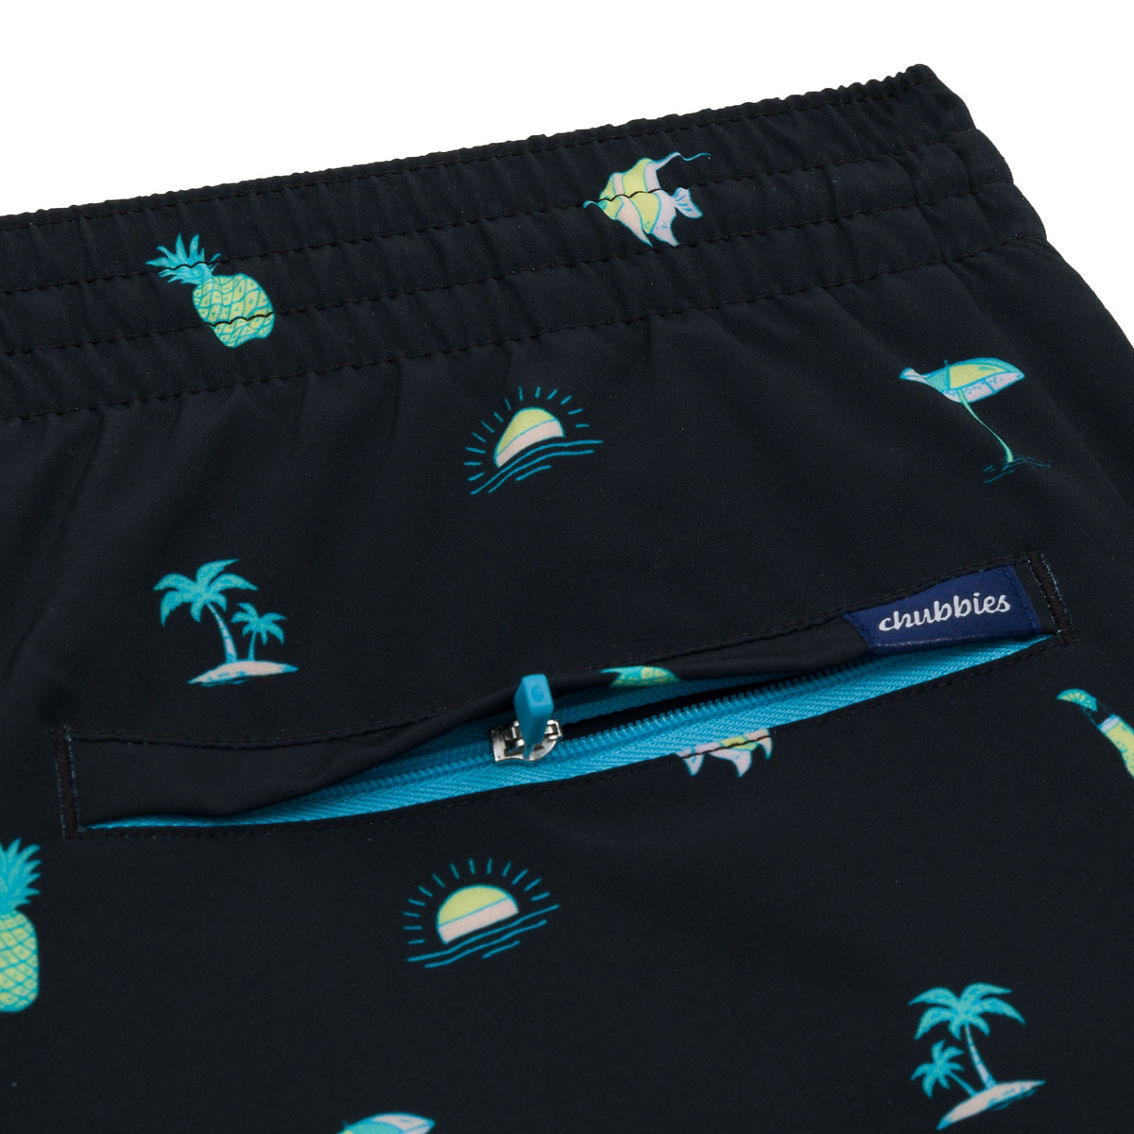 Chubbies The Beach Essentials 5.5 in. Classic Lined Trunks - Image 4 of 4